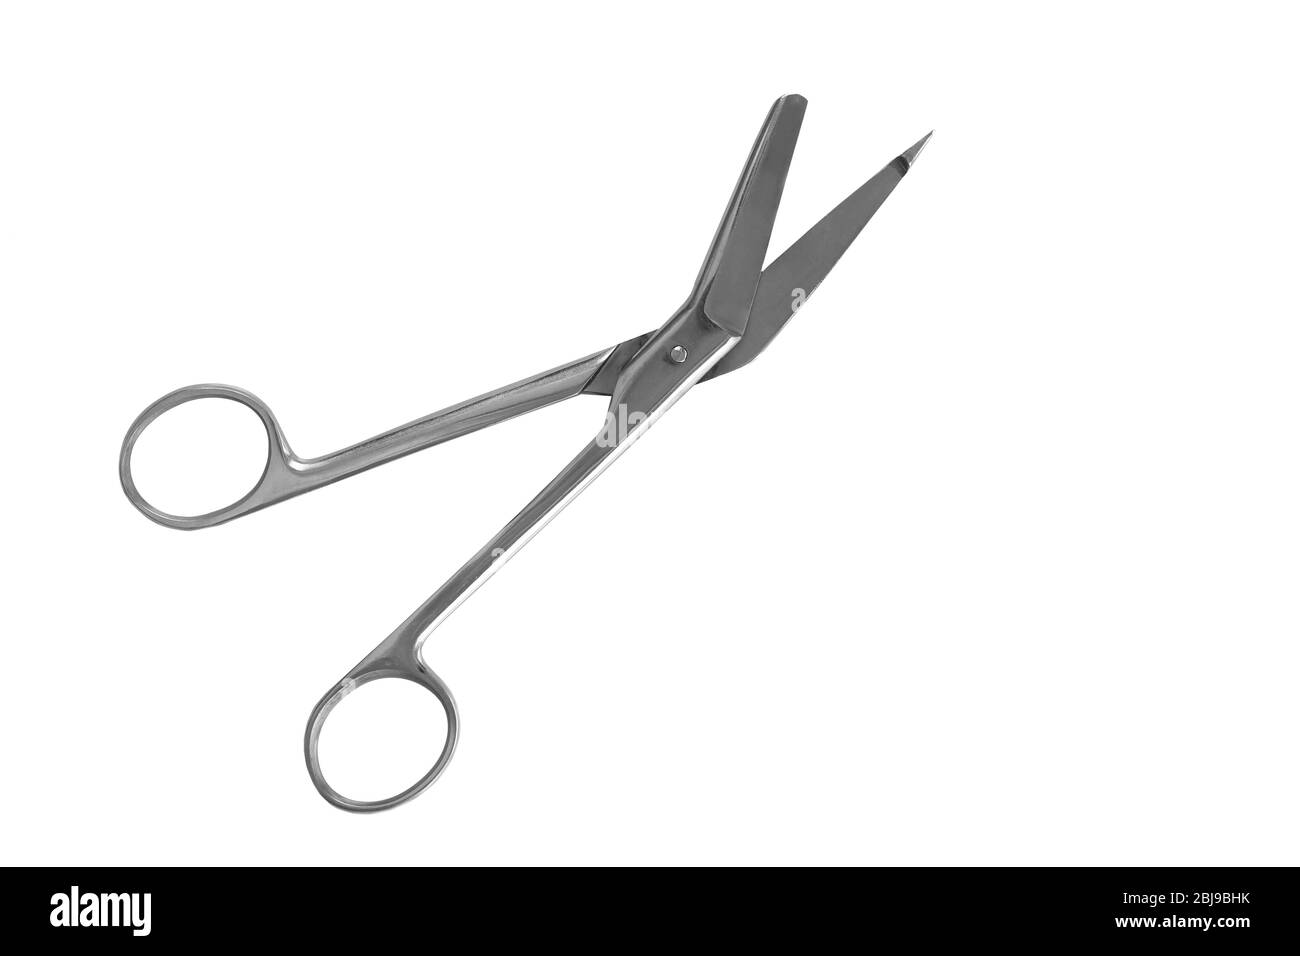 Medical clamp on a white background Stock Photo - Alamy